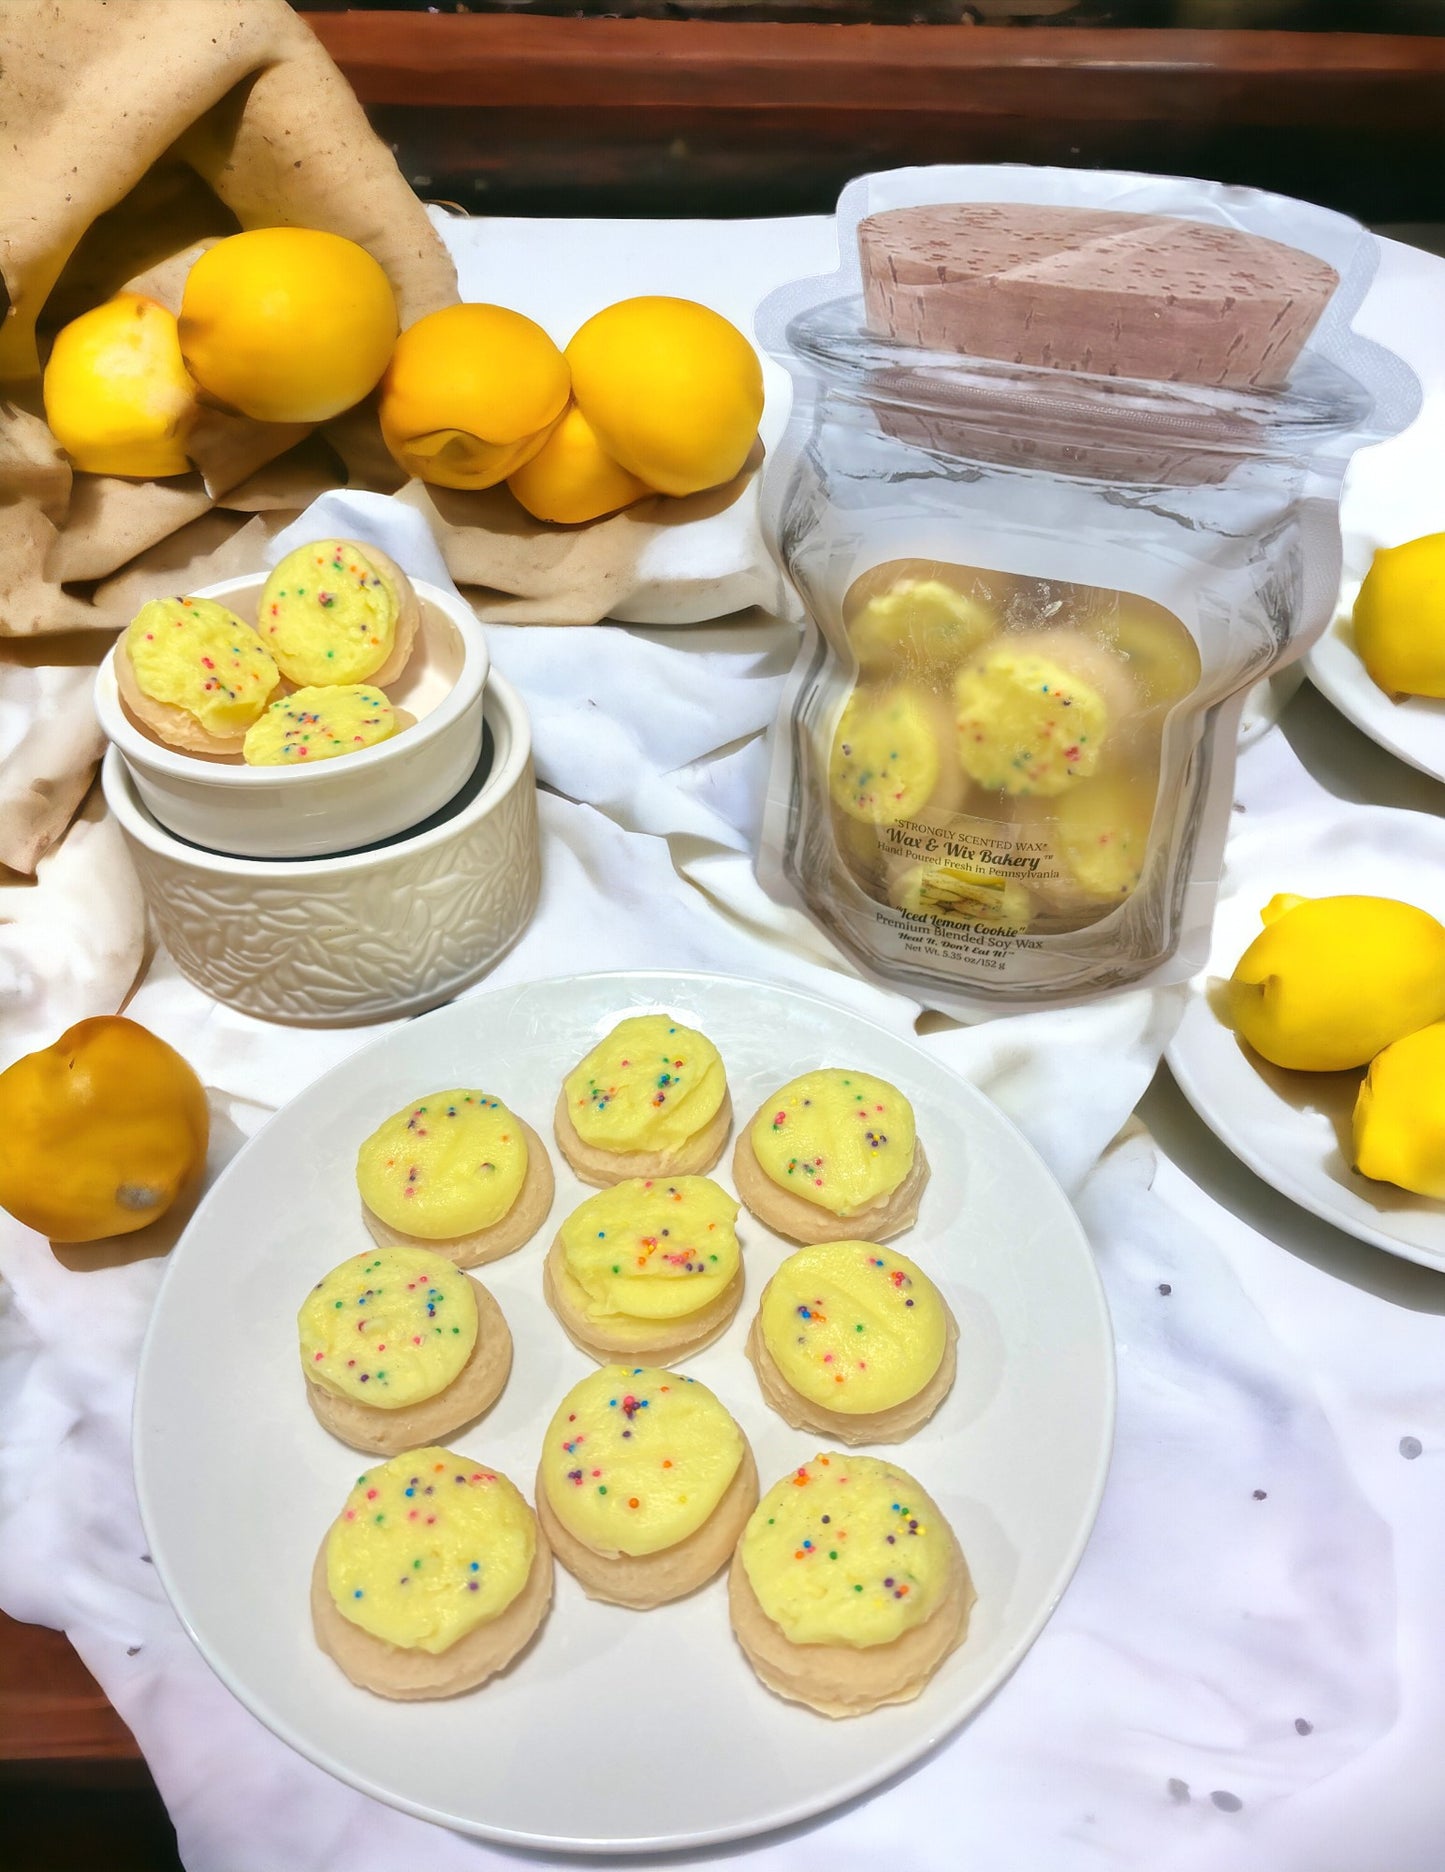 Frosted Lemon Cookie Wax Melts. 5.35 oz. Cookie Wax Melts/Soy Wax Melts/Strongly Scented Wax Melts/9 Cookies